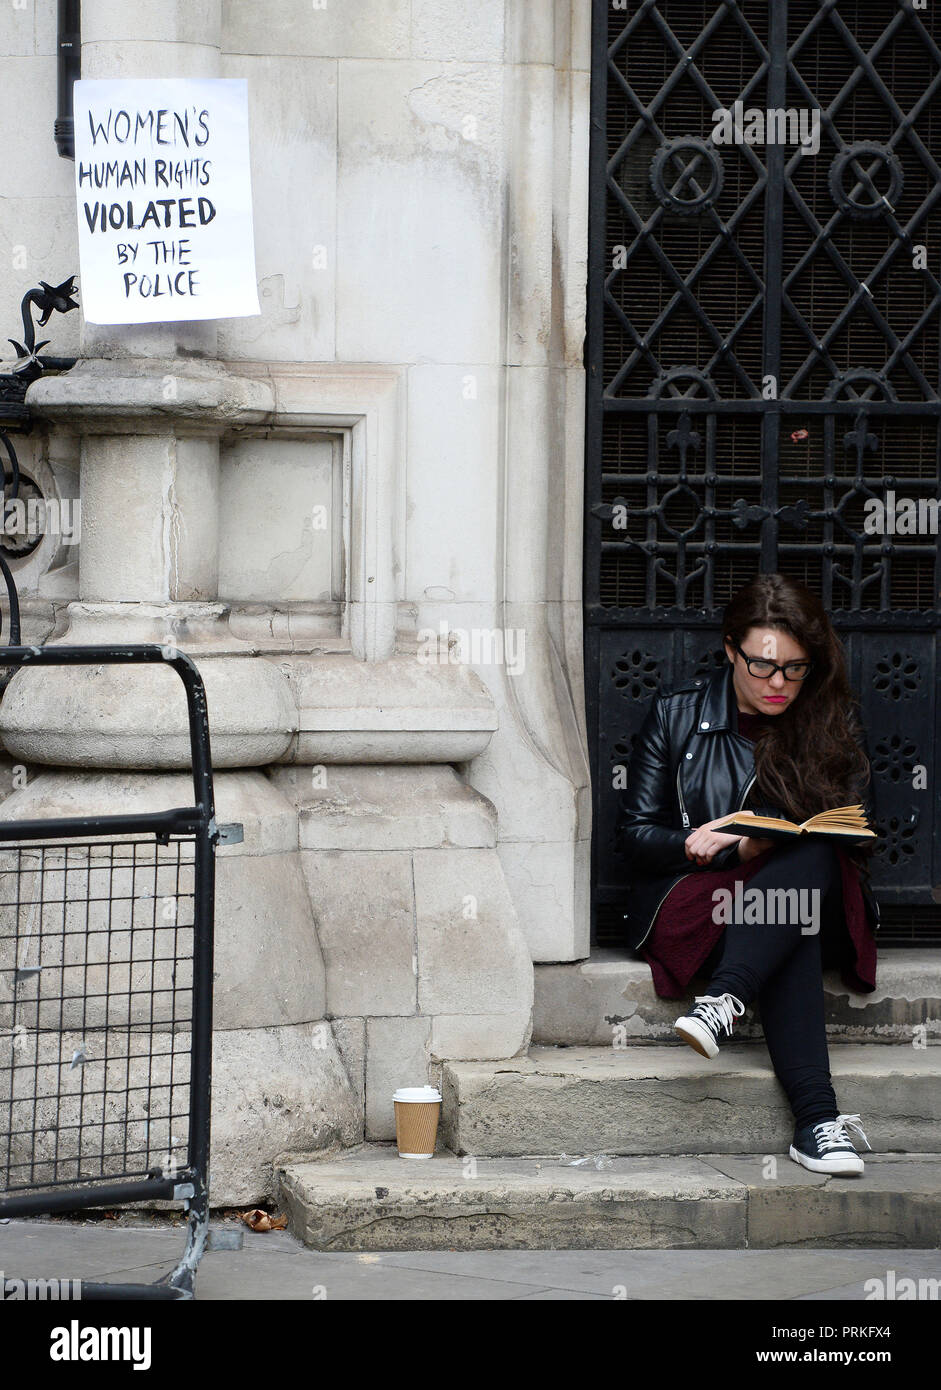 A women reads a book next to a protest sign outside the Royal Courts of Justice, London, where an Investigatory Powers Tribunal is hearing the case of Kate Wilson who was deceived into a relationship by undercover police officer Mark Kennedy. Stock Photo